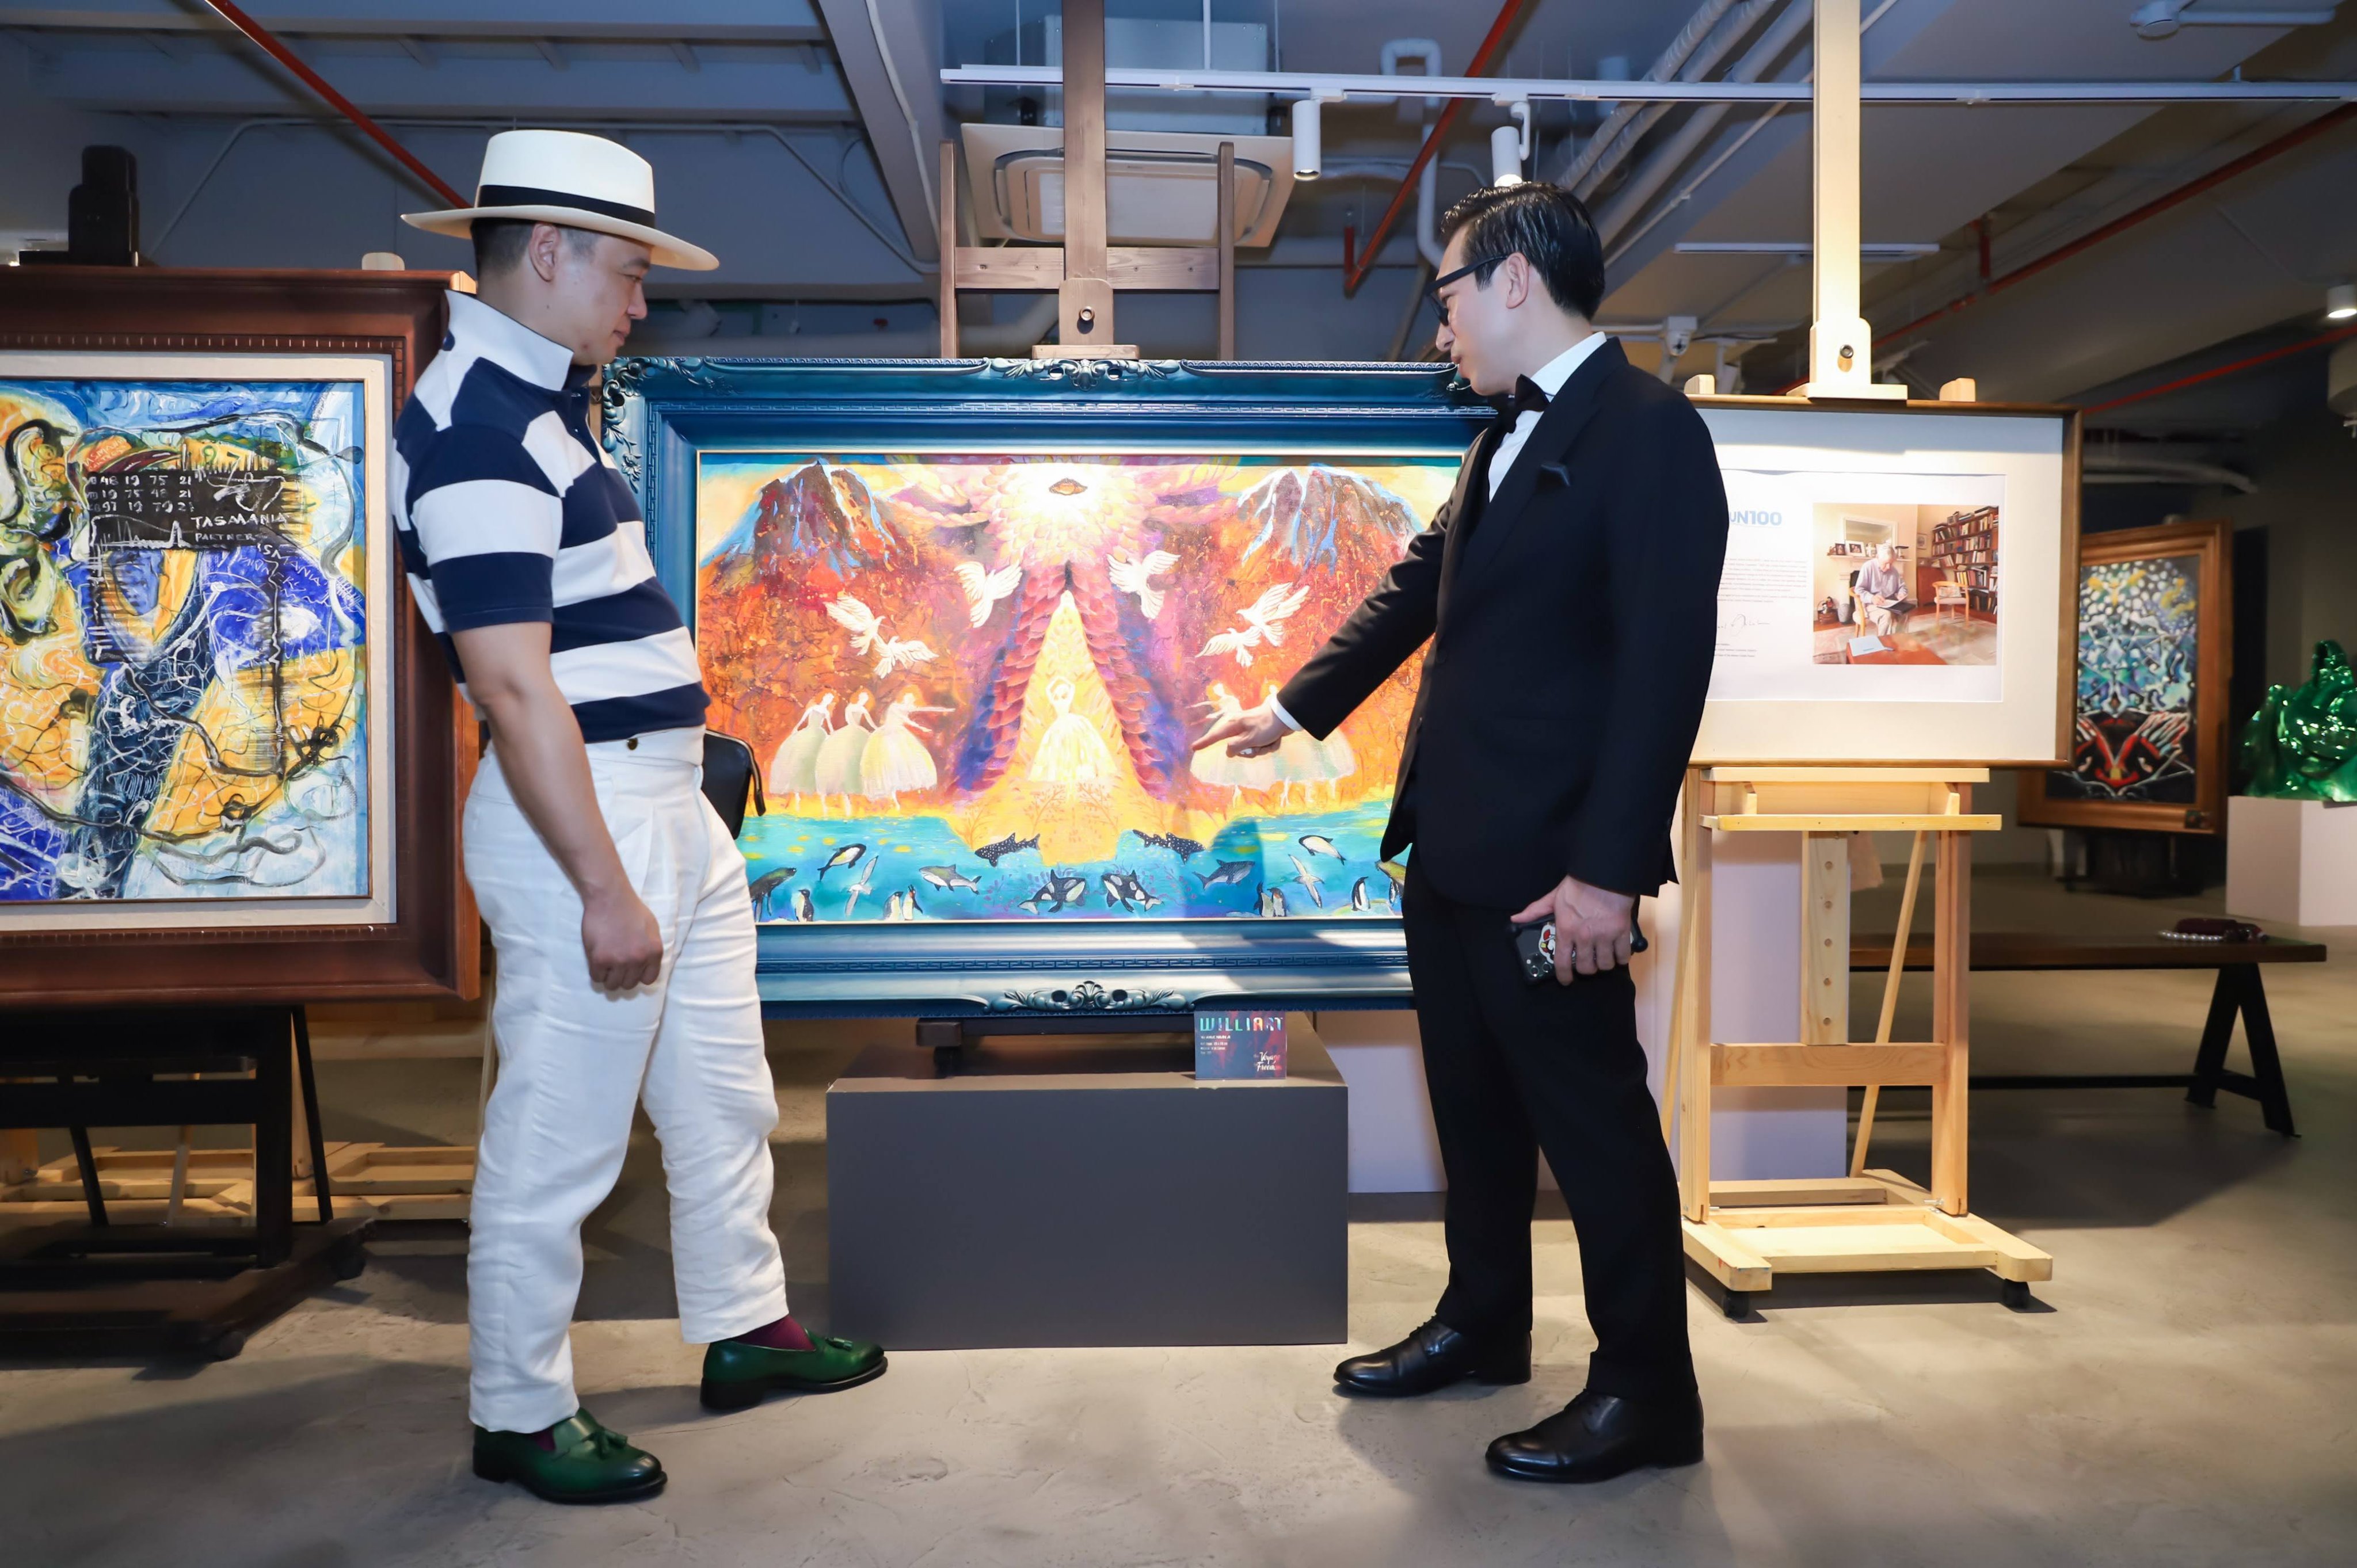 Painter William Pham (left) introduces Vu khuc nhan ai, the star of “The Voyage to Freedom” exhibition, to Vietnamese Ambassador to Israel Ly Duc Trung, on December 31, 2021. Photo: Ngo Art Gallery